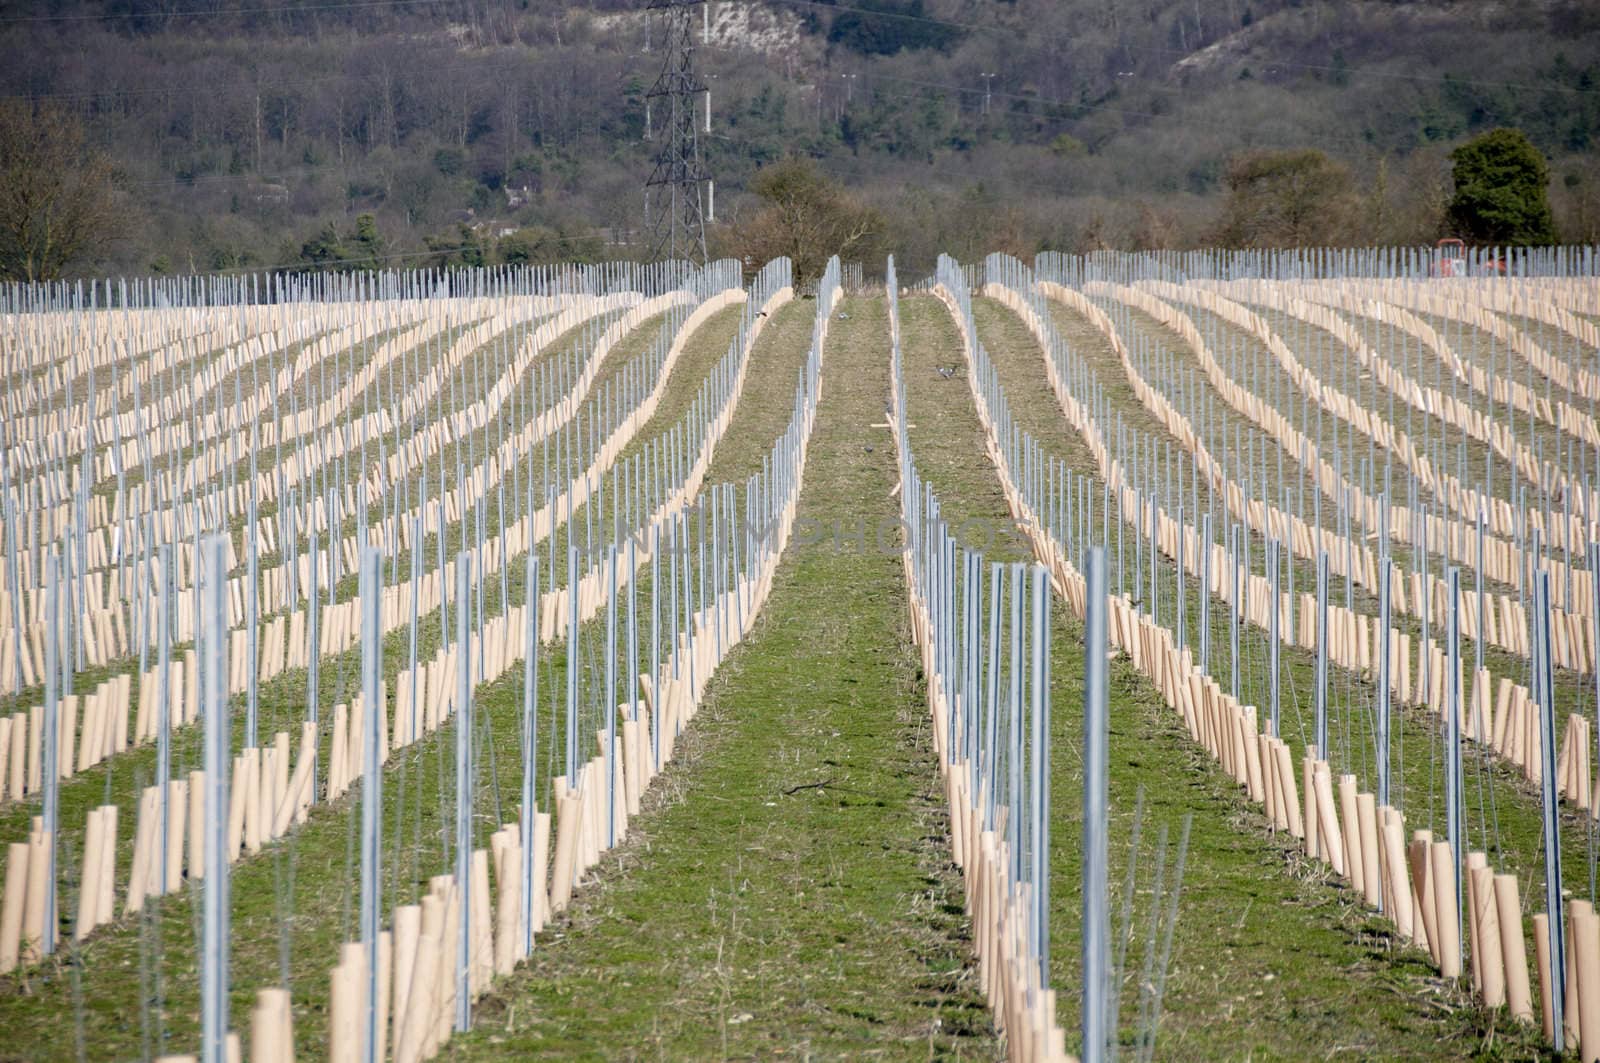 Rows of newly planted grape vines in Kent